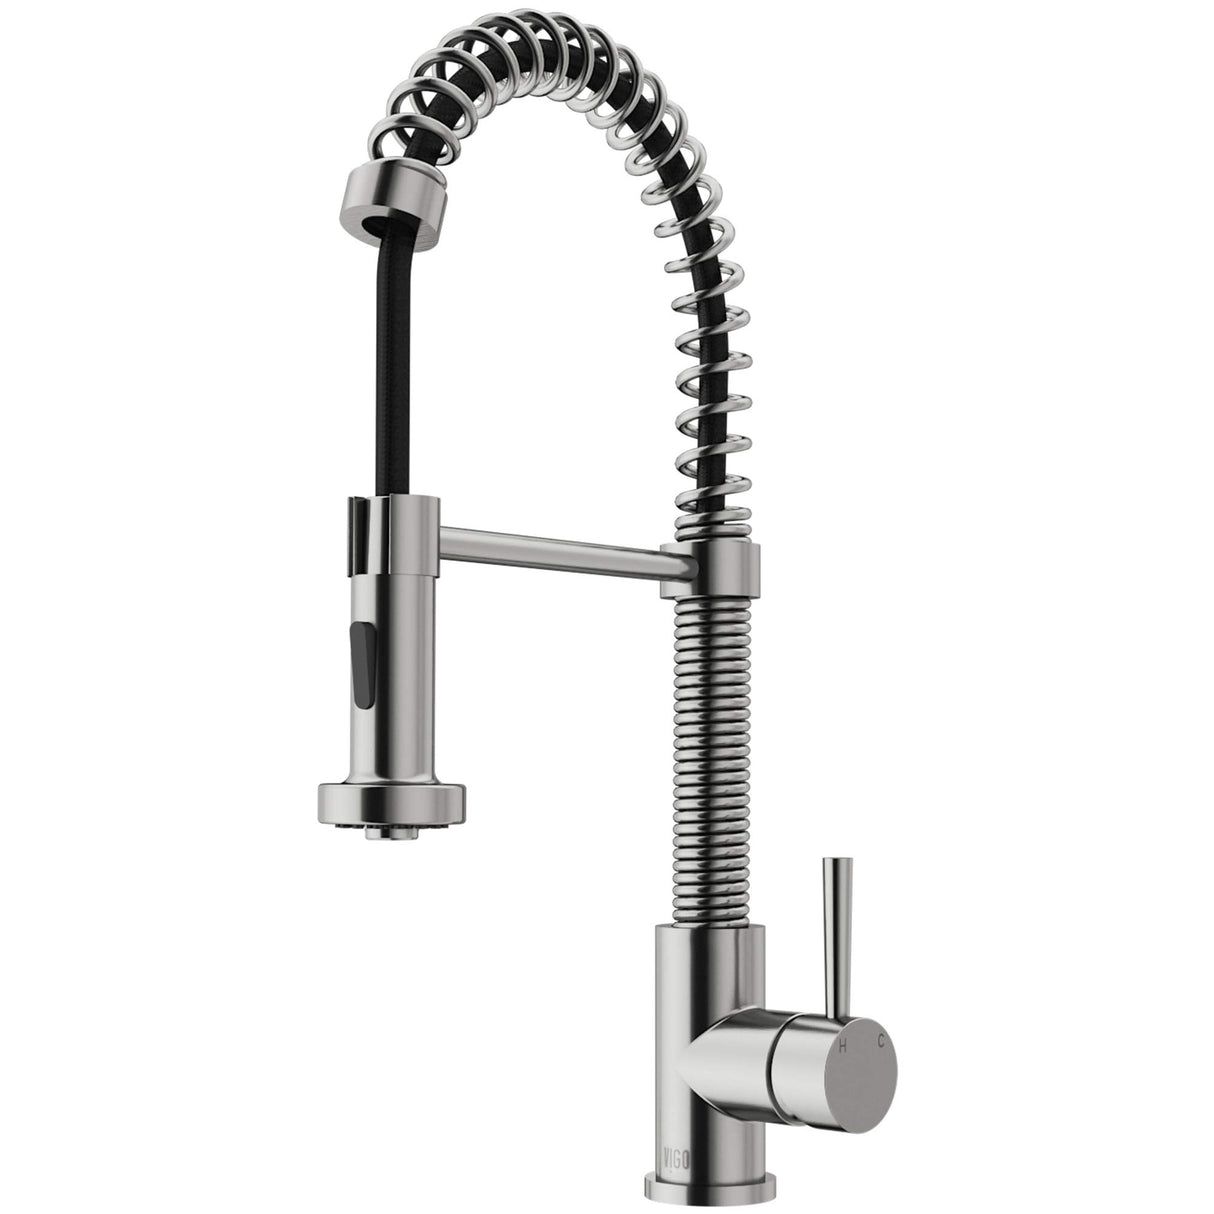 VIGO VG02001ST 19" H Edison Single-Handle with Pull-Down Sprayer Kitchen Faucet in Stainless Steel